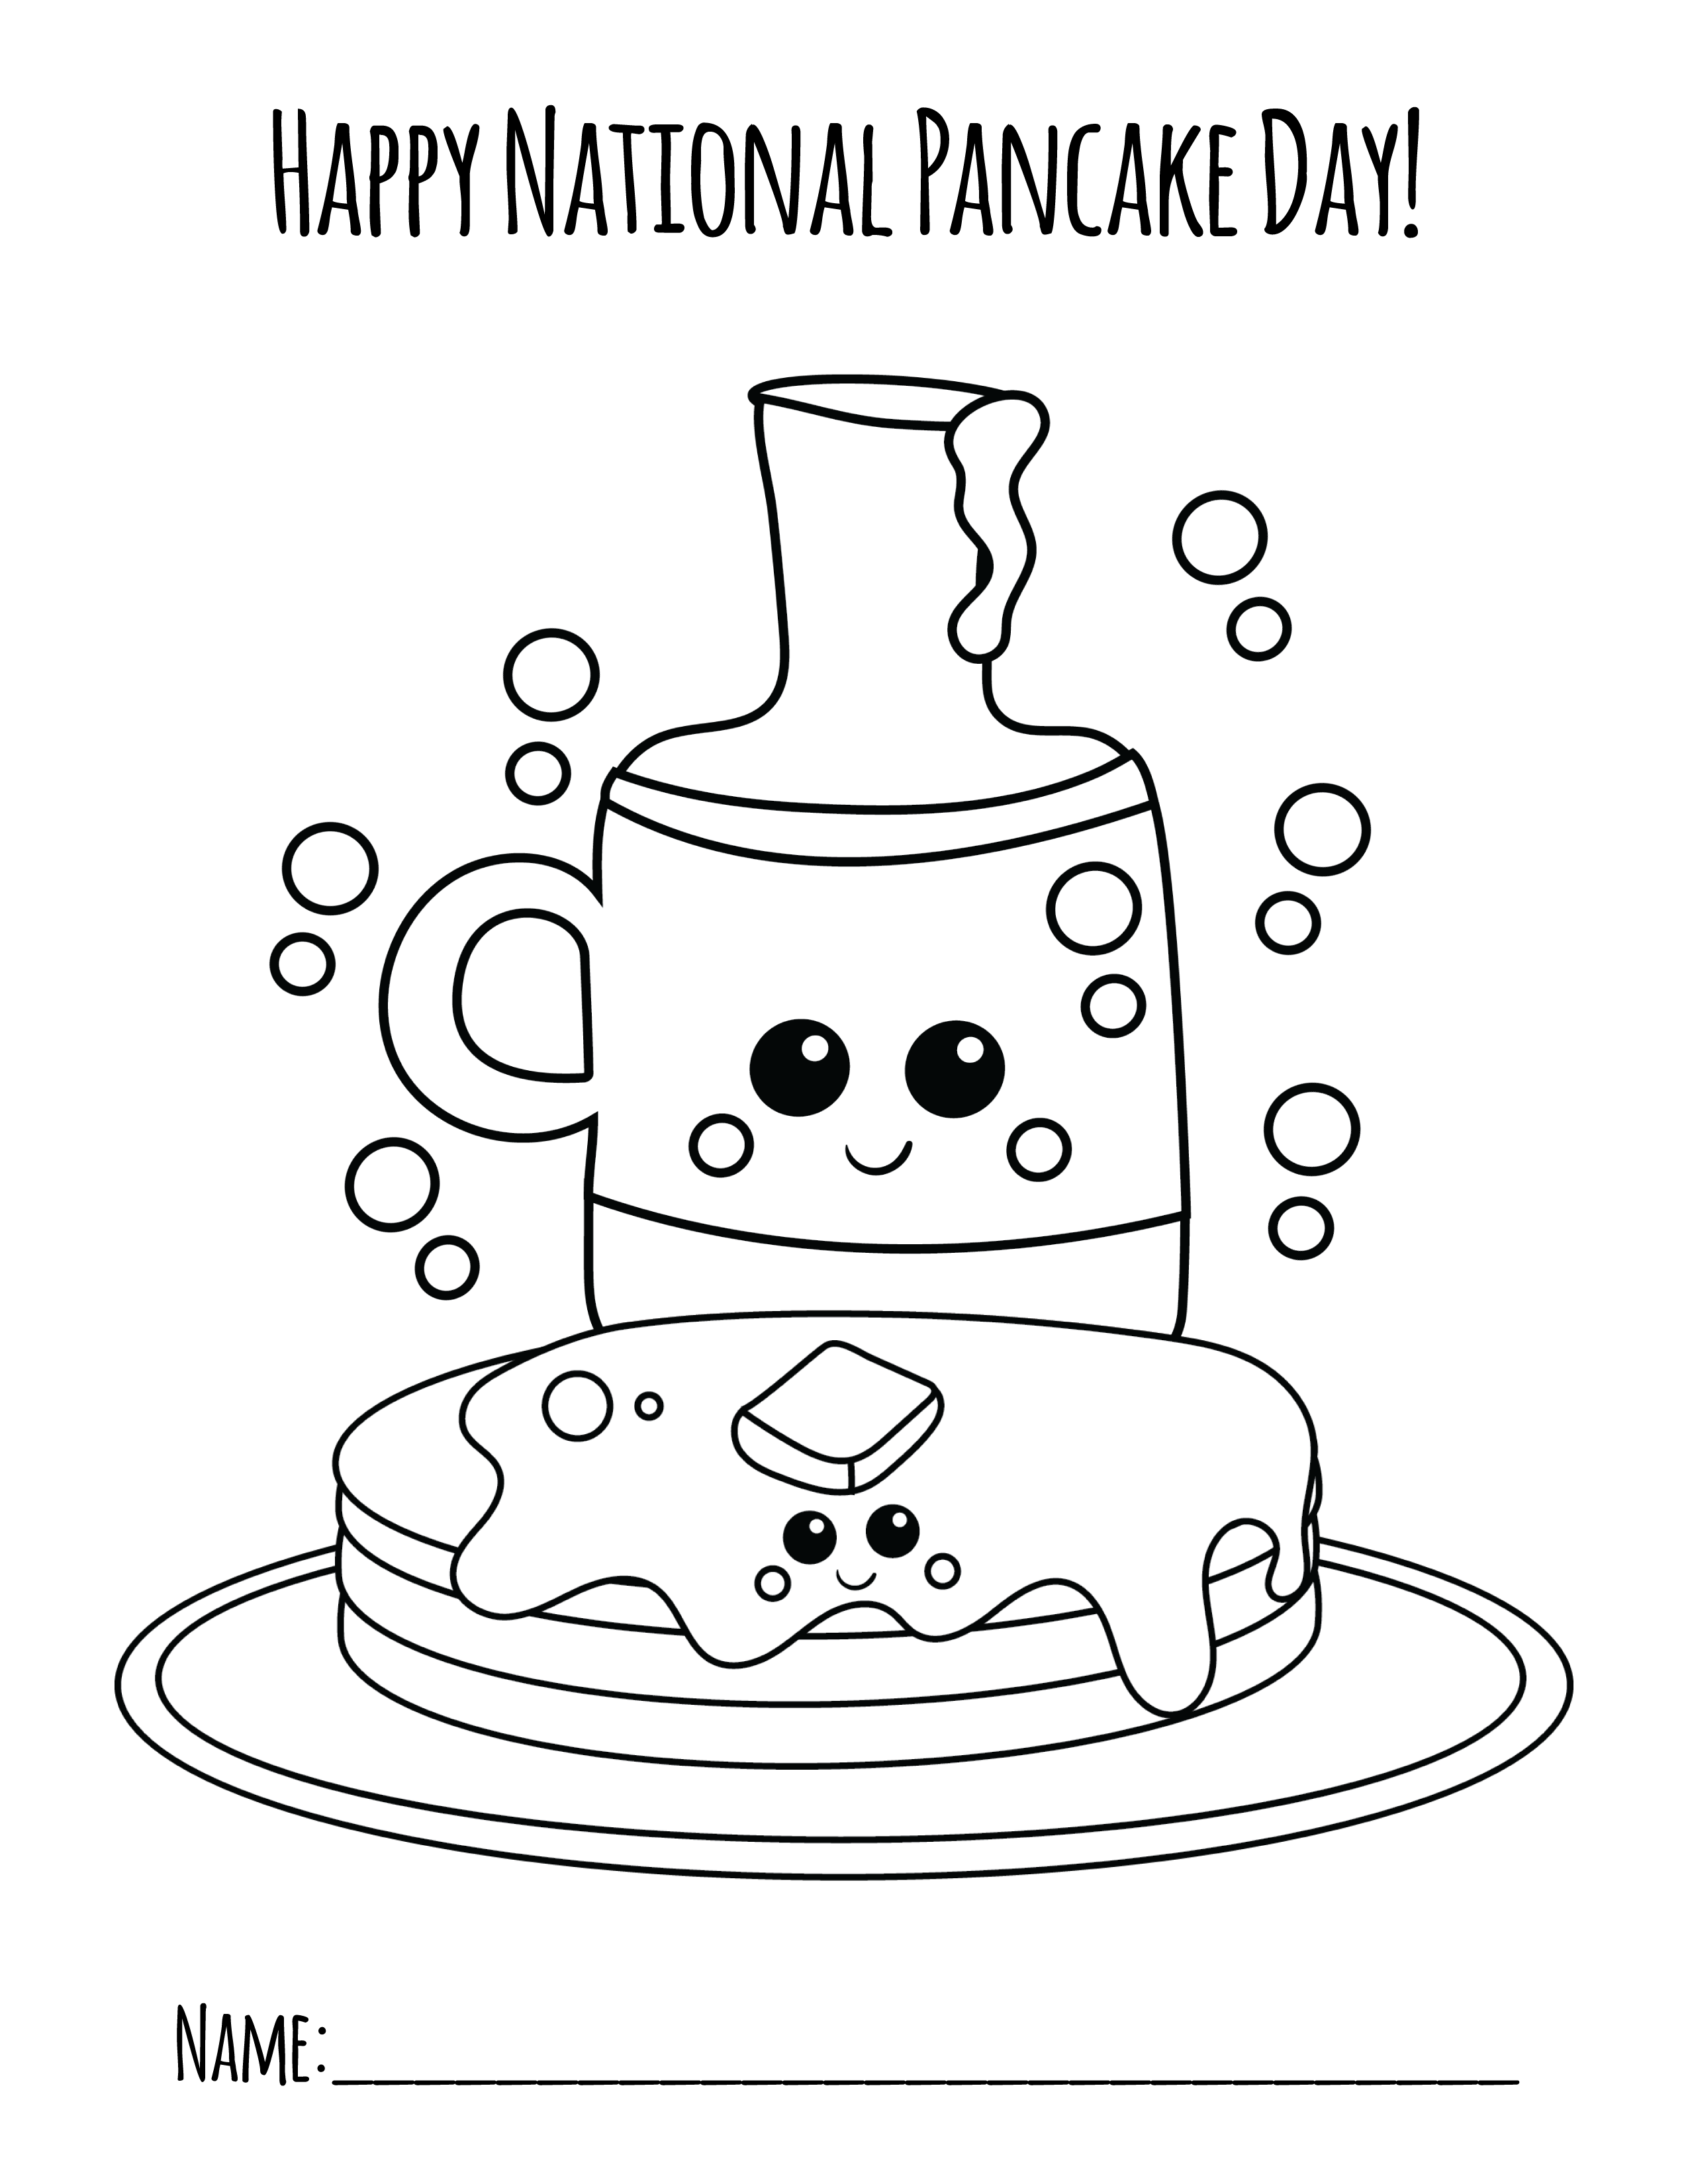 21+ Pancakes Coloring Pages - LatitiaIrvine